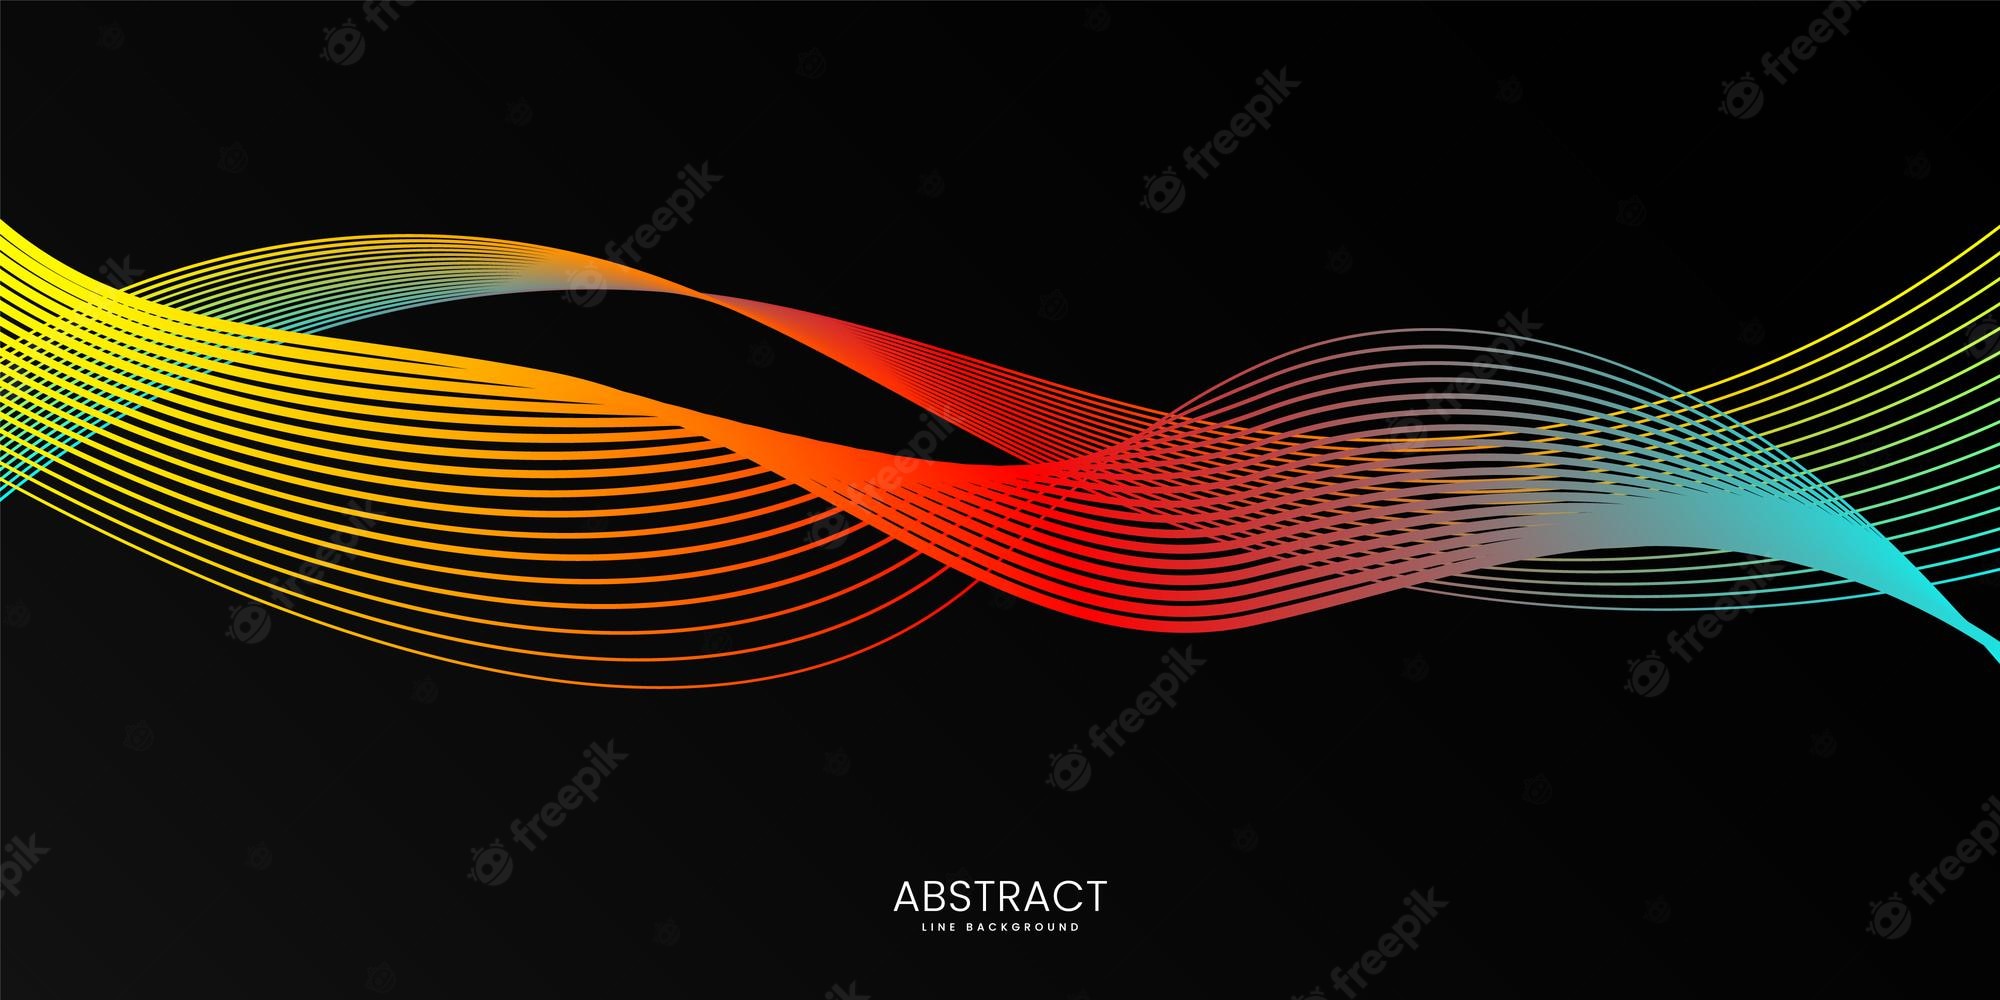 Waves Of Color On A Black Background